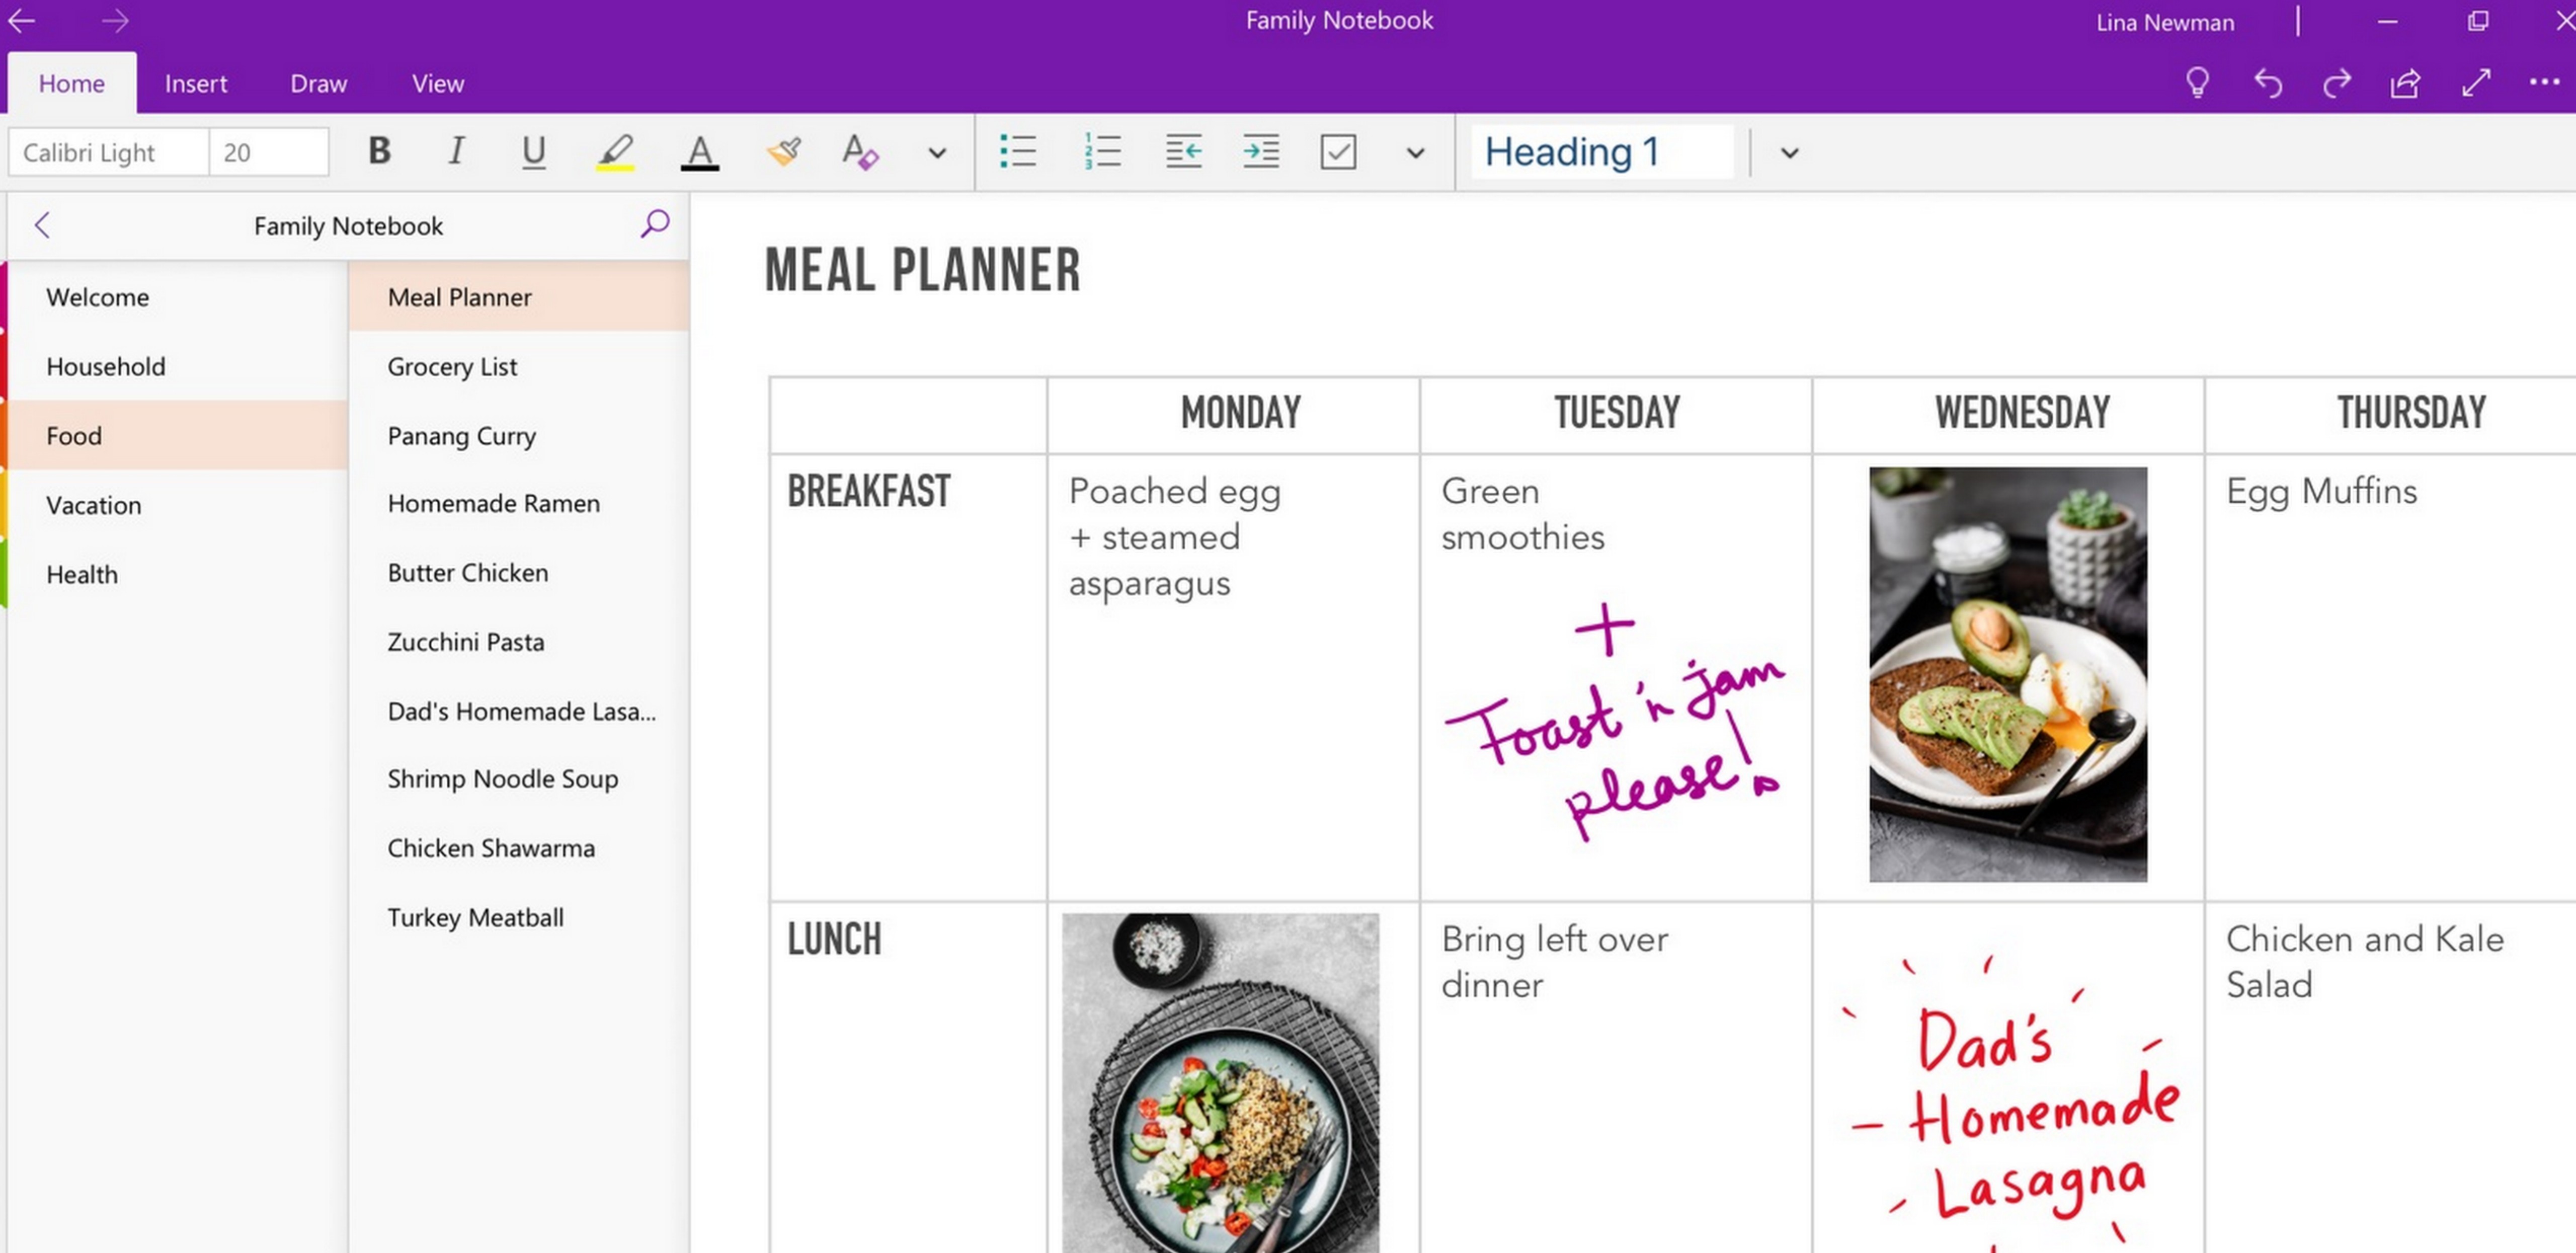 A meal planning calendar in a family notebook